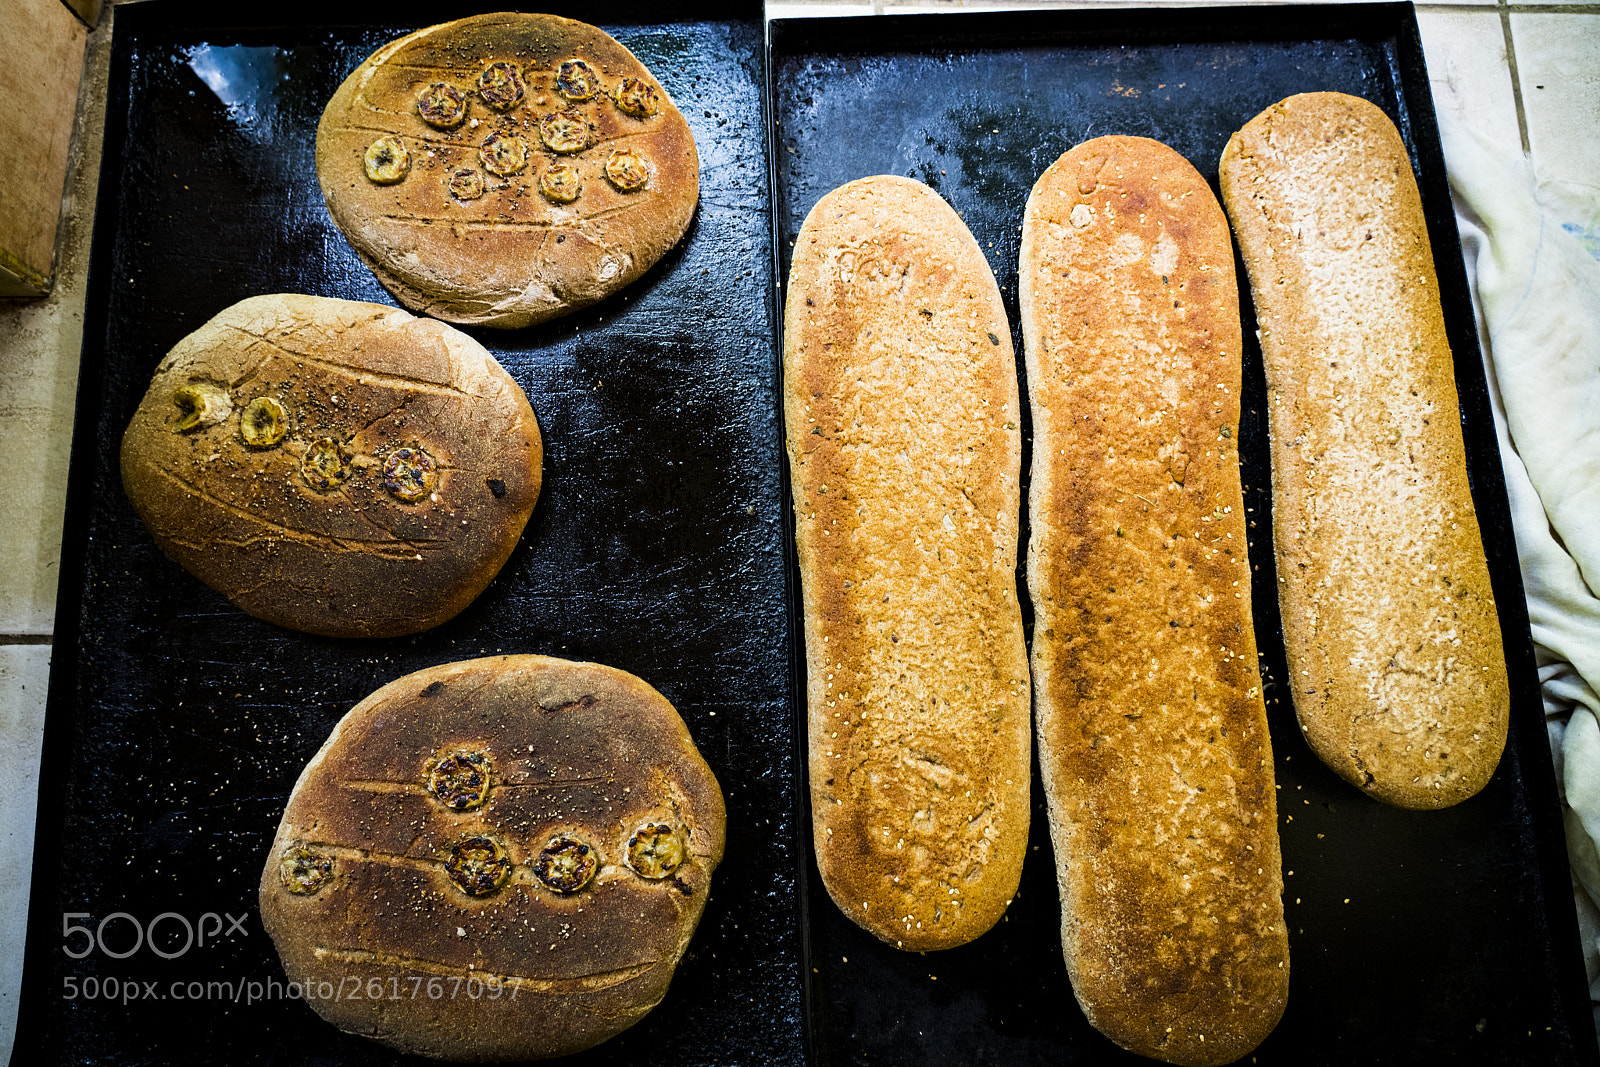 Sony a7R III sample photo. Freshly baked bread and photography